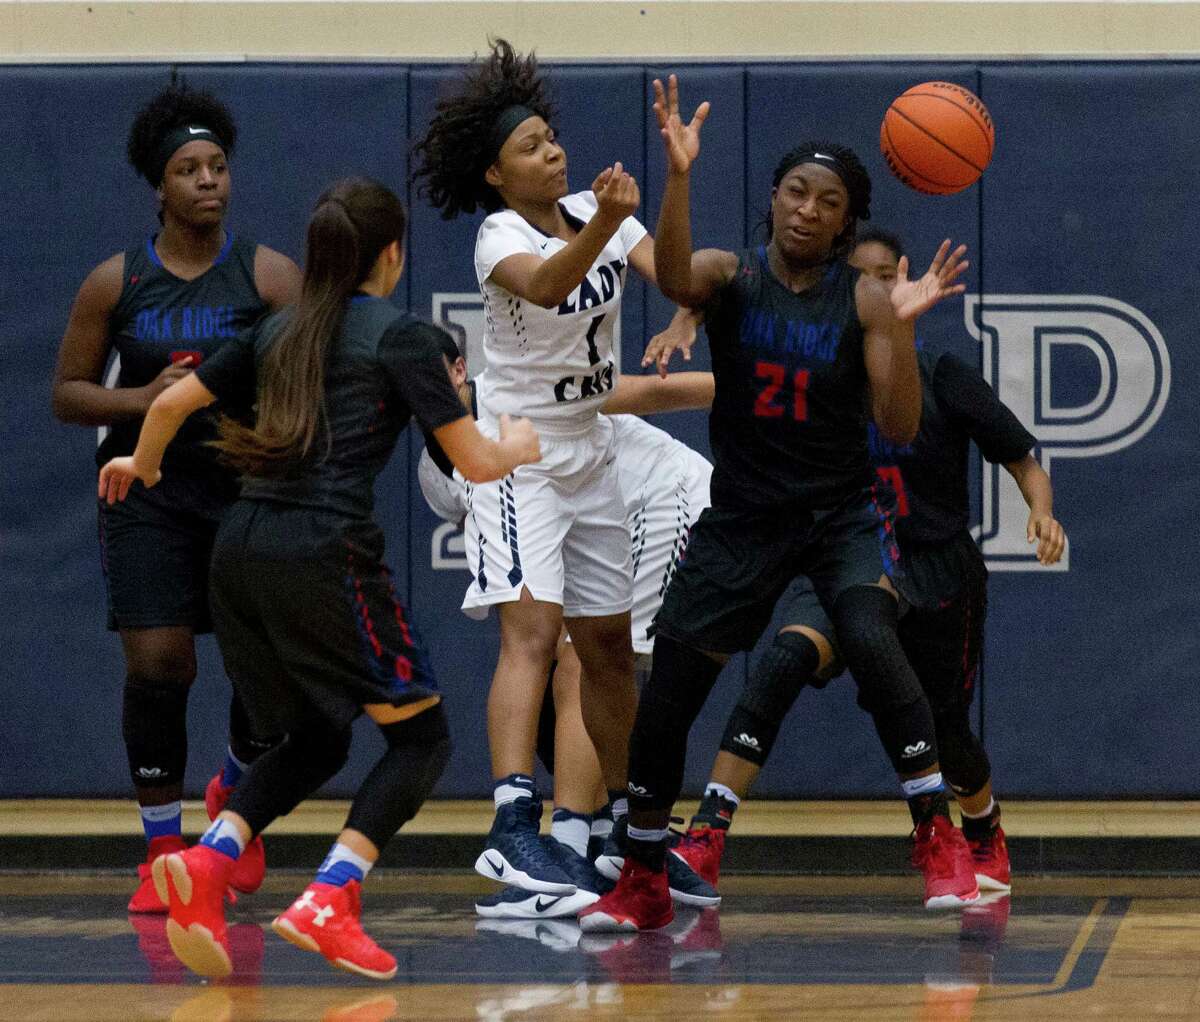 Oak Ridge's Alecia Whyte (21) tries to locate a rebound after College Park's Jasmine Handy (1) is stripped of the ball during the third quarter of a District 16-6A high school girls basketball game at College Park High School Friday, Jan. 20, 2017, in The Woodlands. Oak Ridge defeated College Park 56-39.